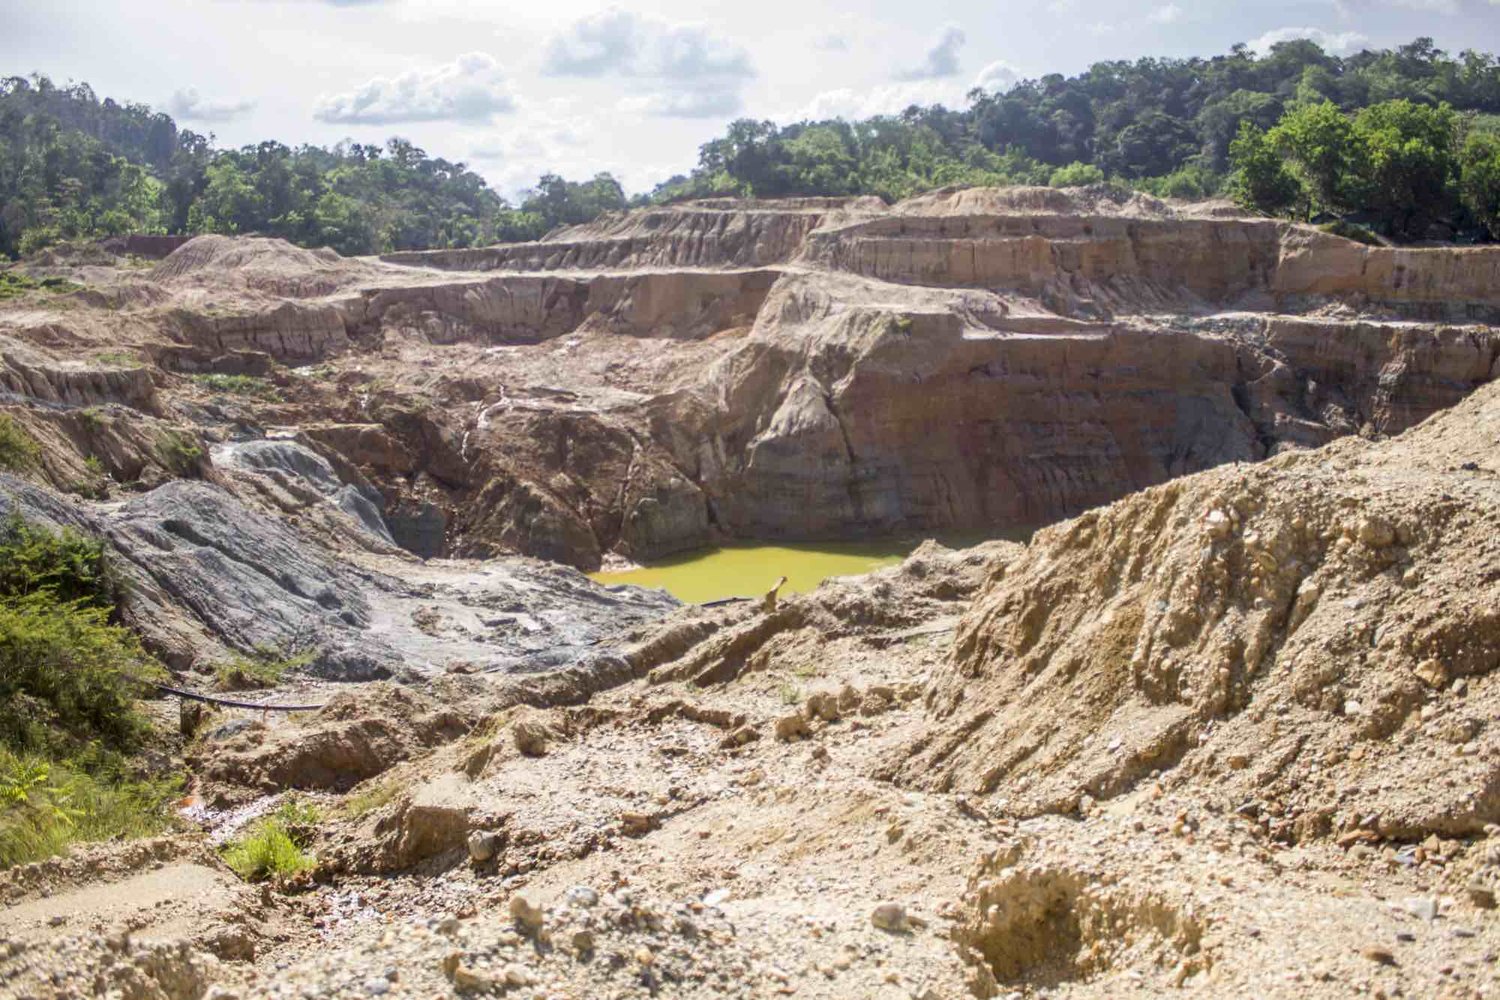 The illegally mined land is a shockingly barren moonscape… massive mountains of bare, eroding orange soil linked to one another by a chain of stagnant red-brown to neon-green mine waste ponds, in ugly contrast to the surrounding verdant, bio-diverse and life-giving jungle.